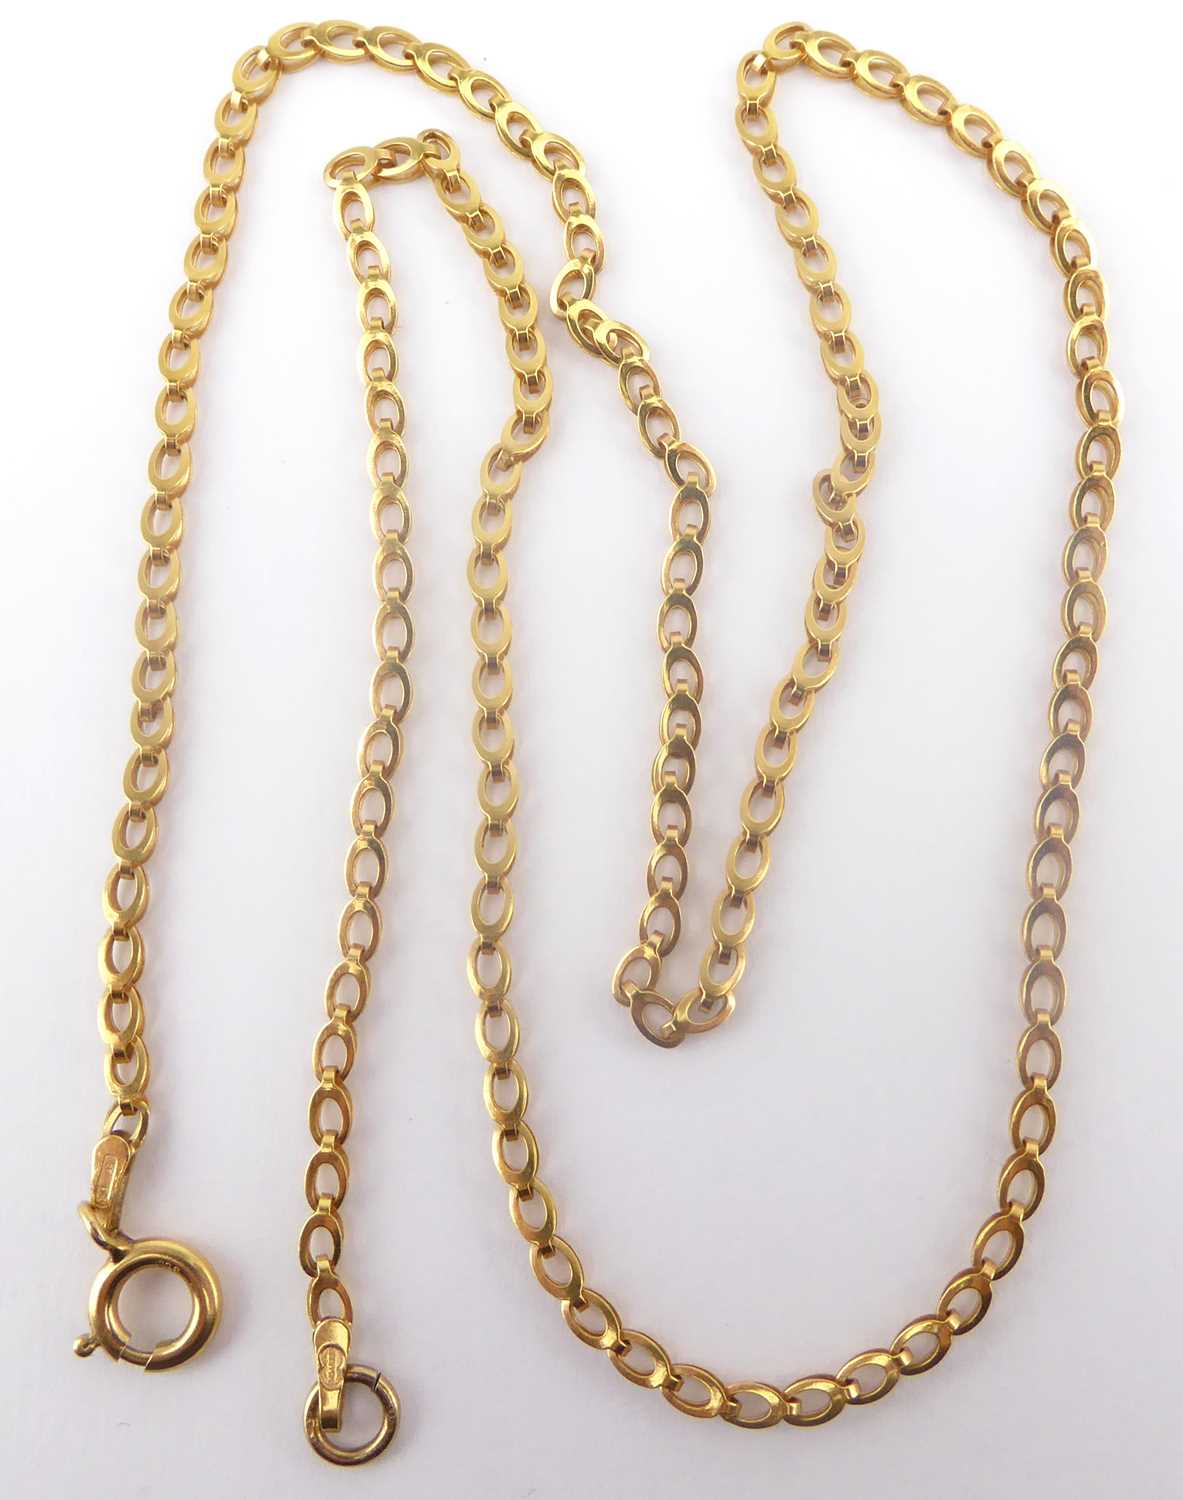 A 9ct gold dainty necklace with hoop clasp, length 52cm, approx 4.2g.